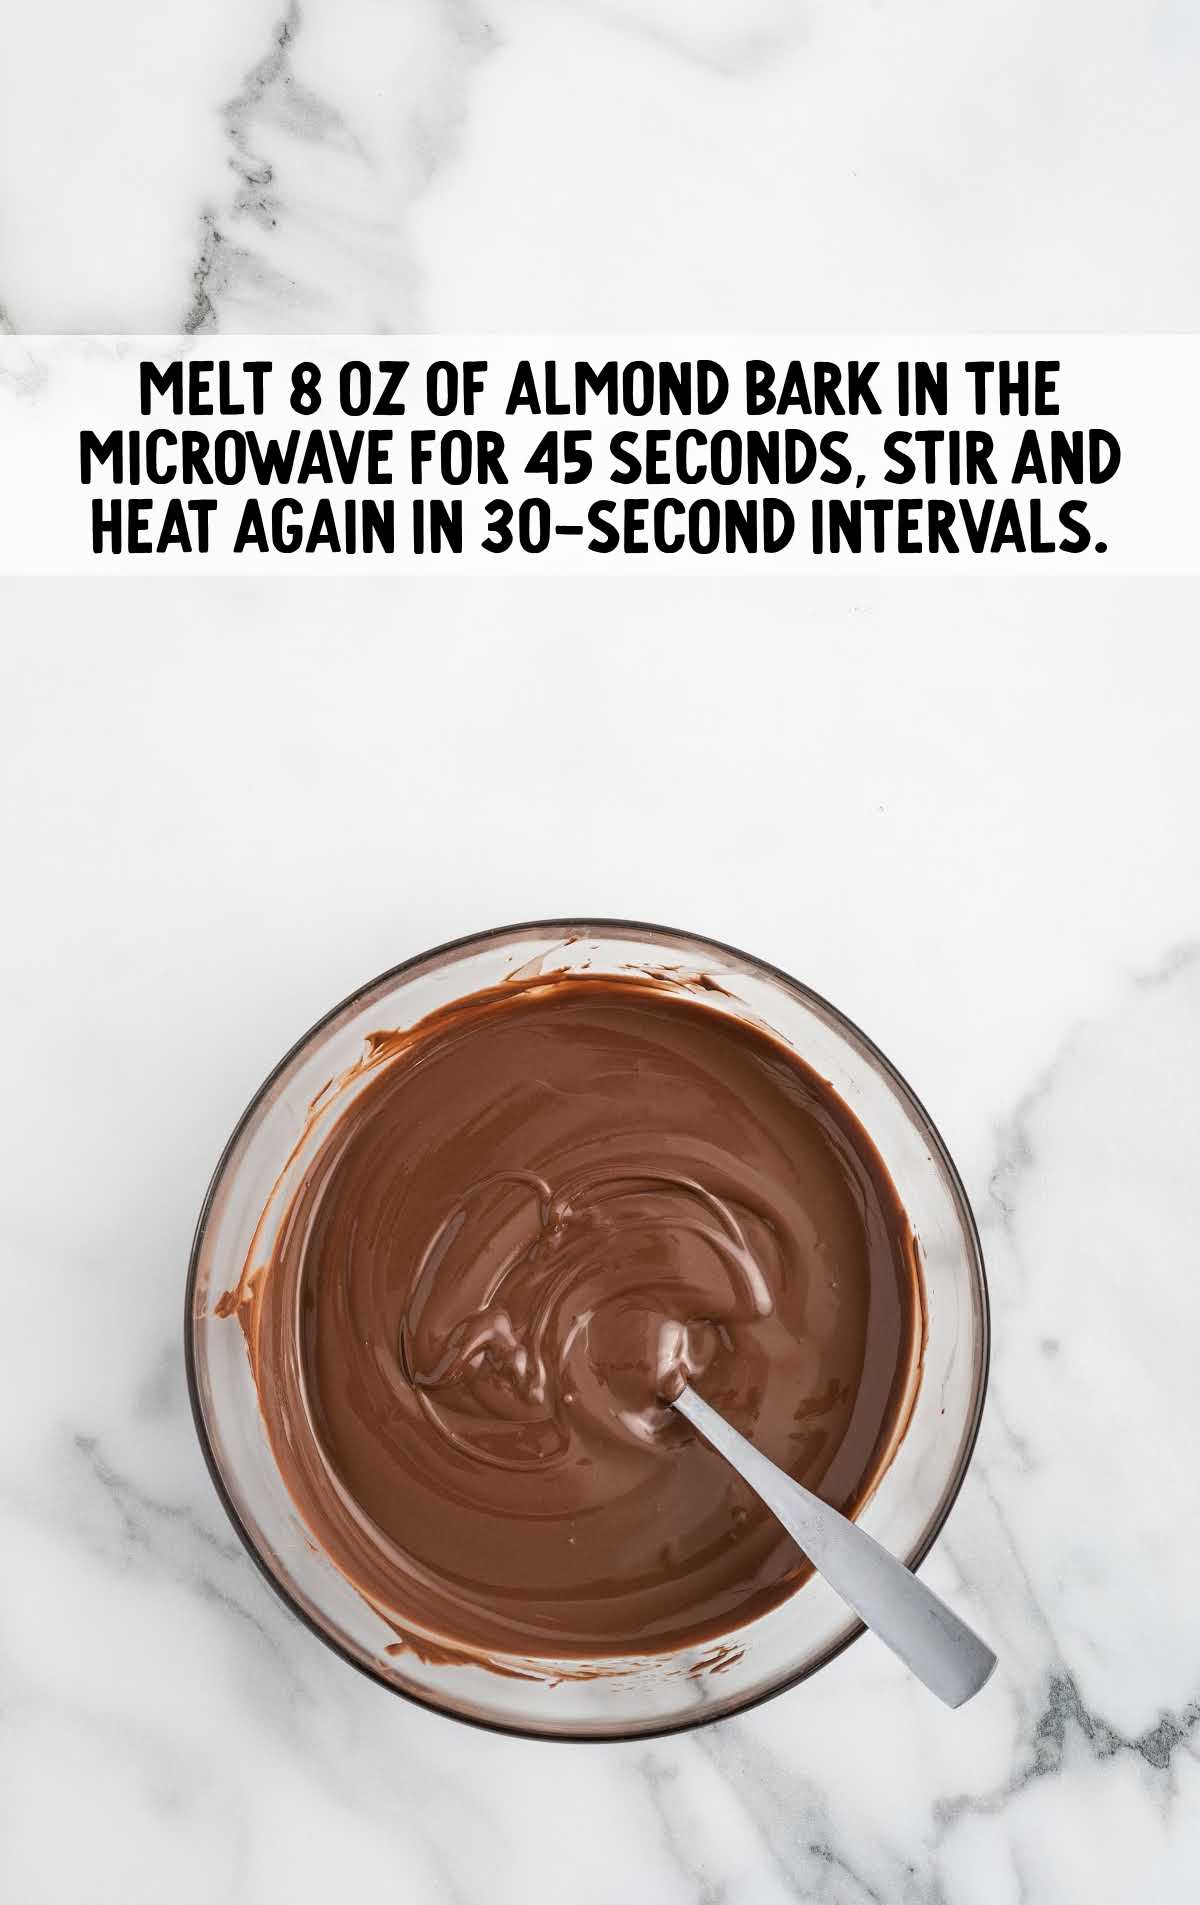 almond bark melted in the microwave